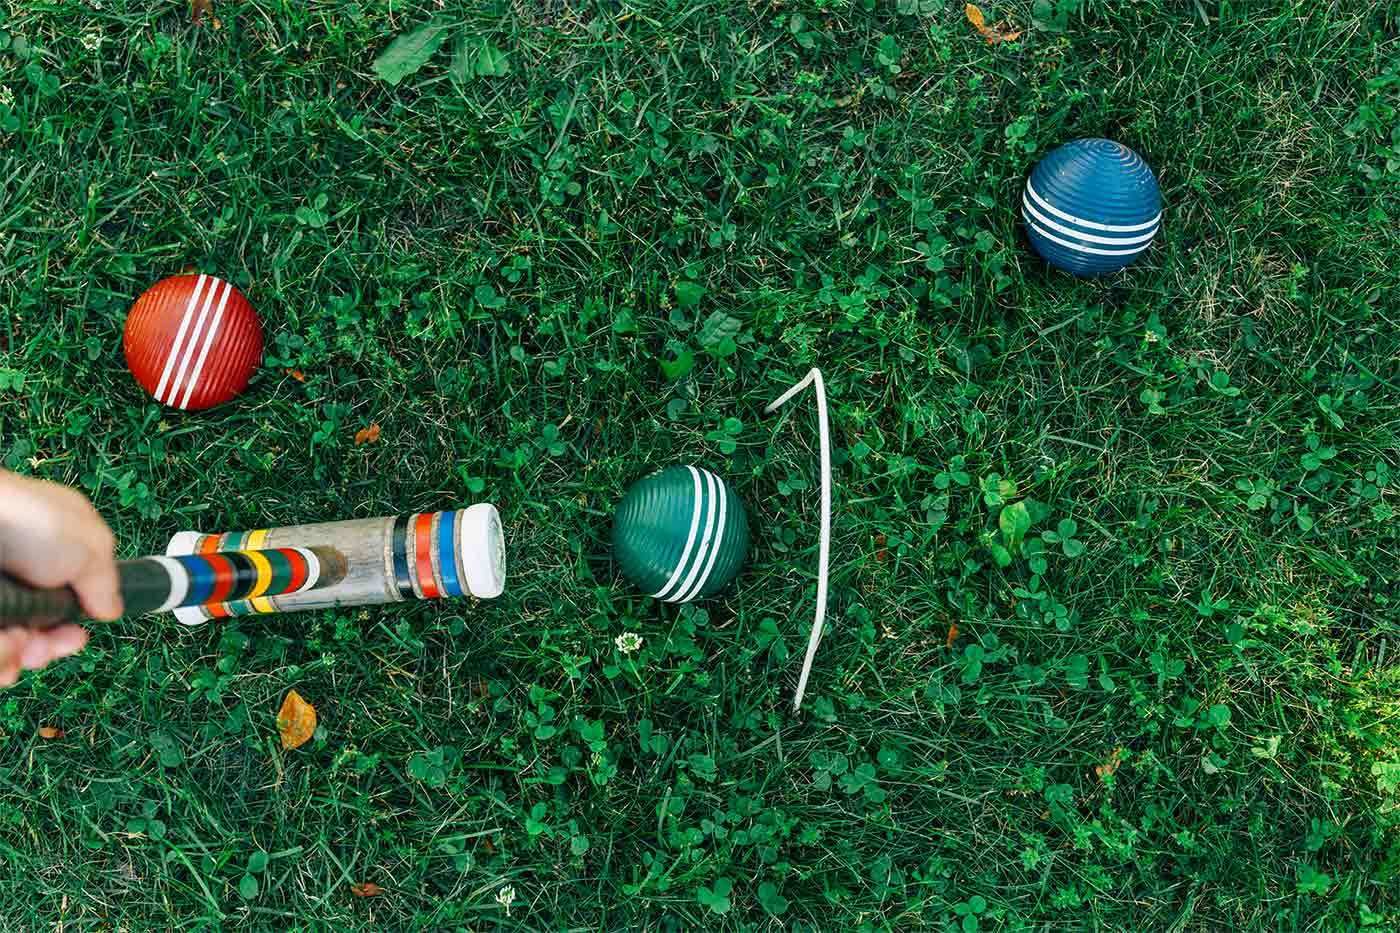 croquet, red, green and blue ball on grass